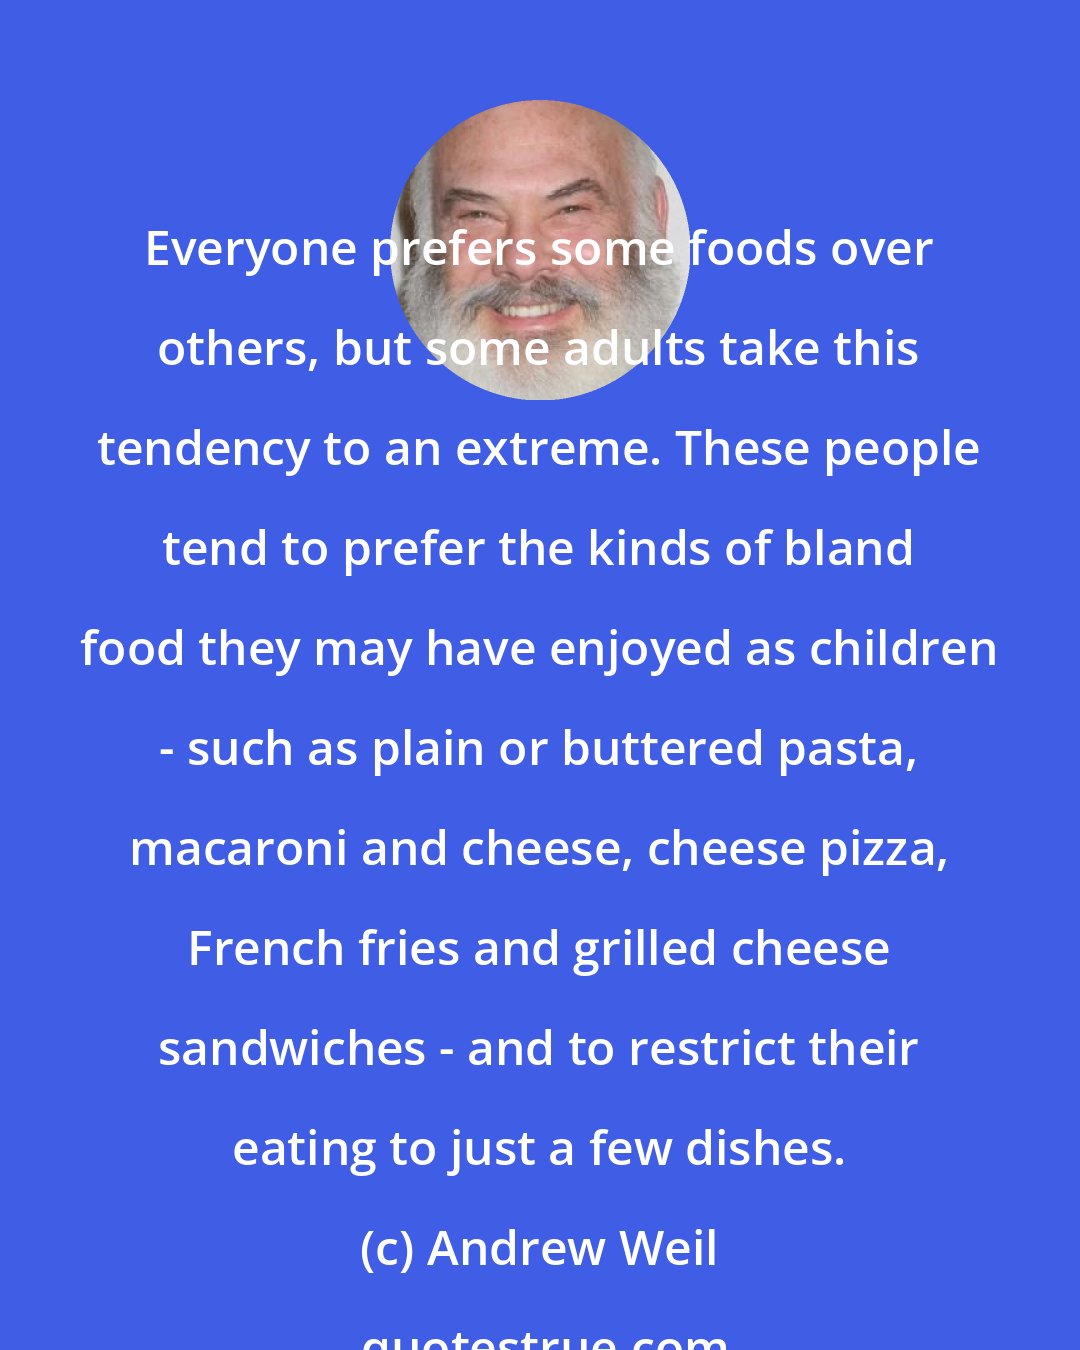 Andrew Weil: Everyone prefers some foods over others, but some adults take this tendency to an extreme. These people tend to prefer the kinds of bland food they may have enjoyed as children - such as plain or buttered pasta, macaroni and cheese, cheese pizza, French fries and grilled cheese sandwiches - and to restrict their eating to just a few dishes.